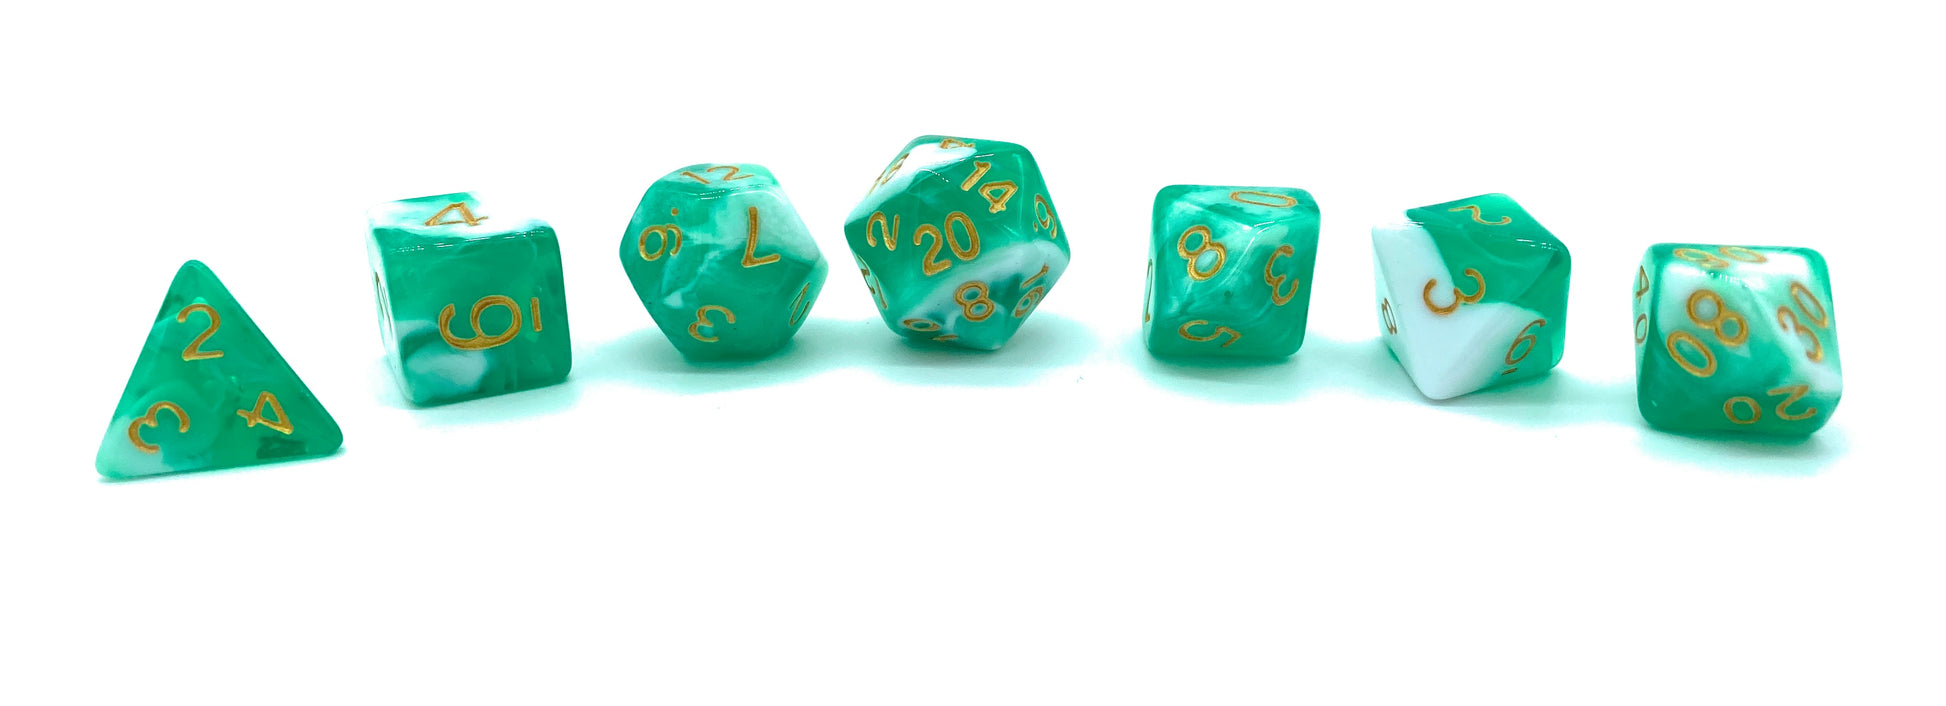 Undead Ichor- Green and White Translucent - Critical Dice